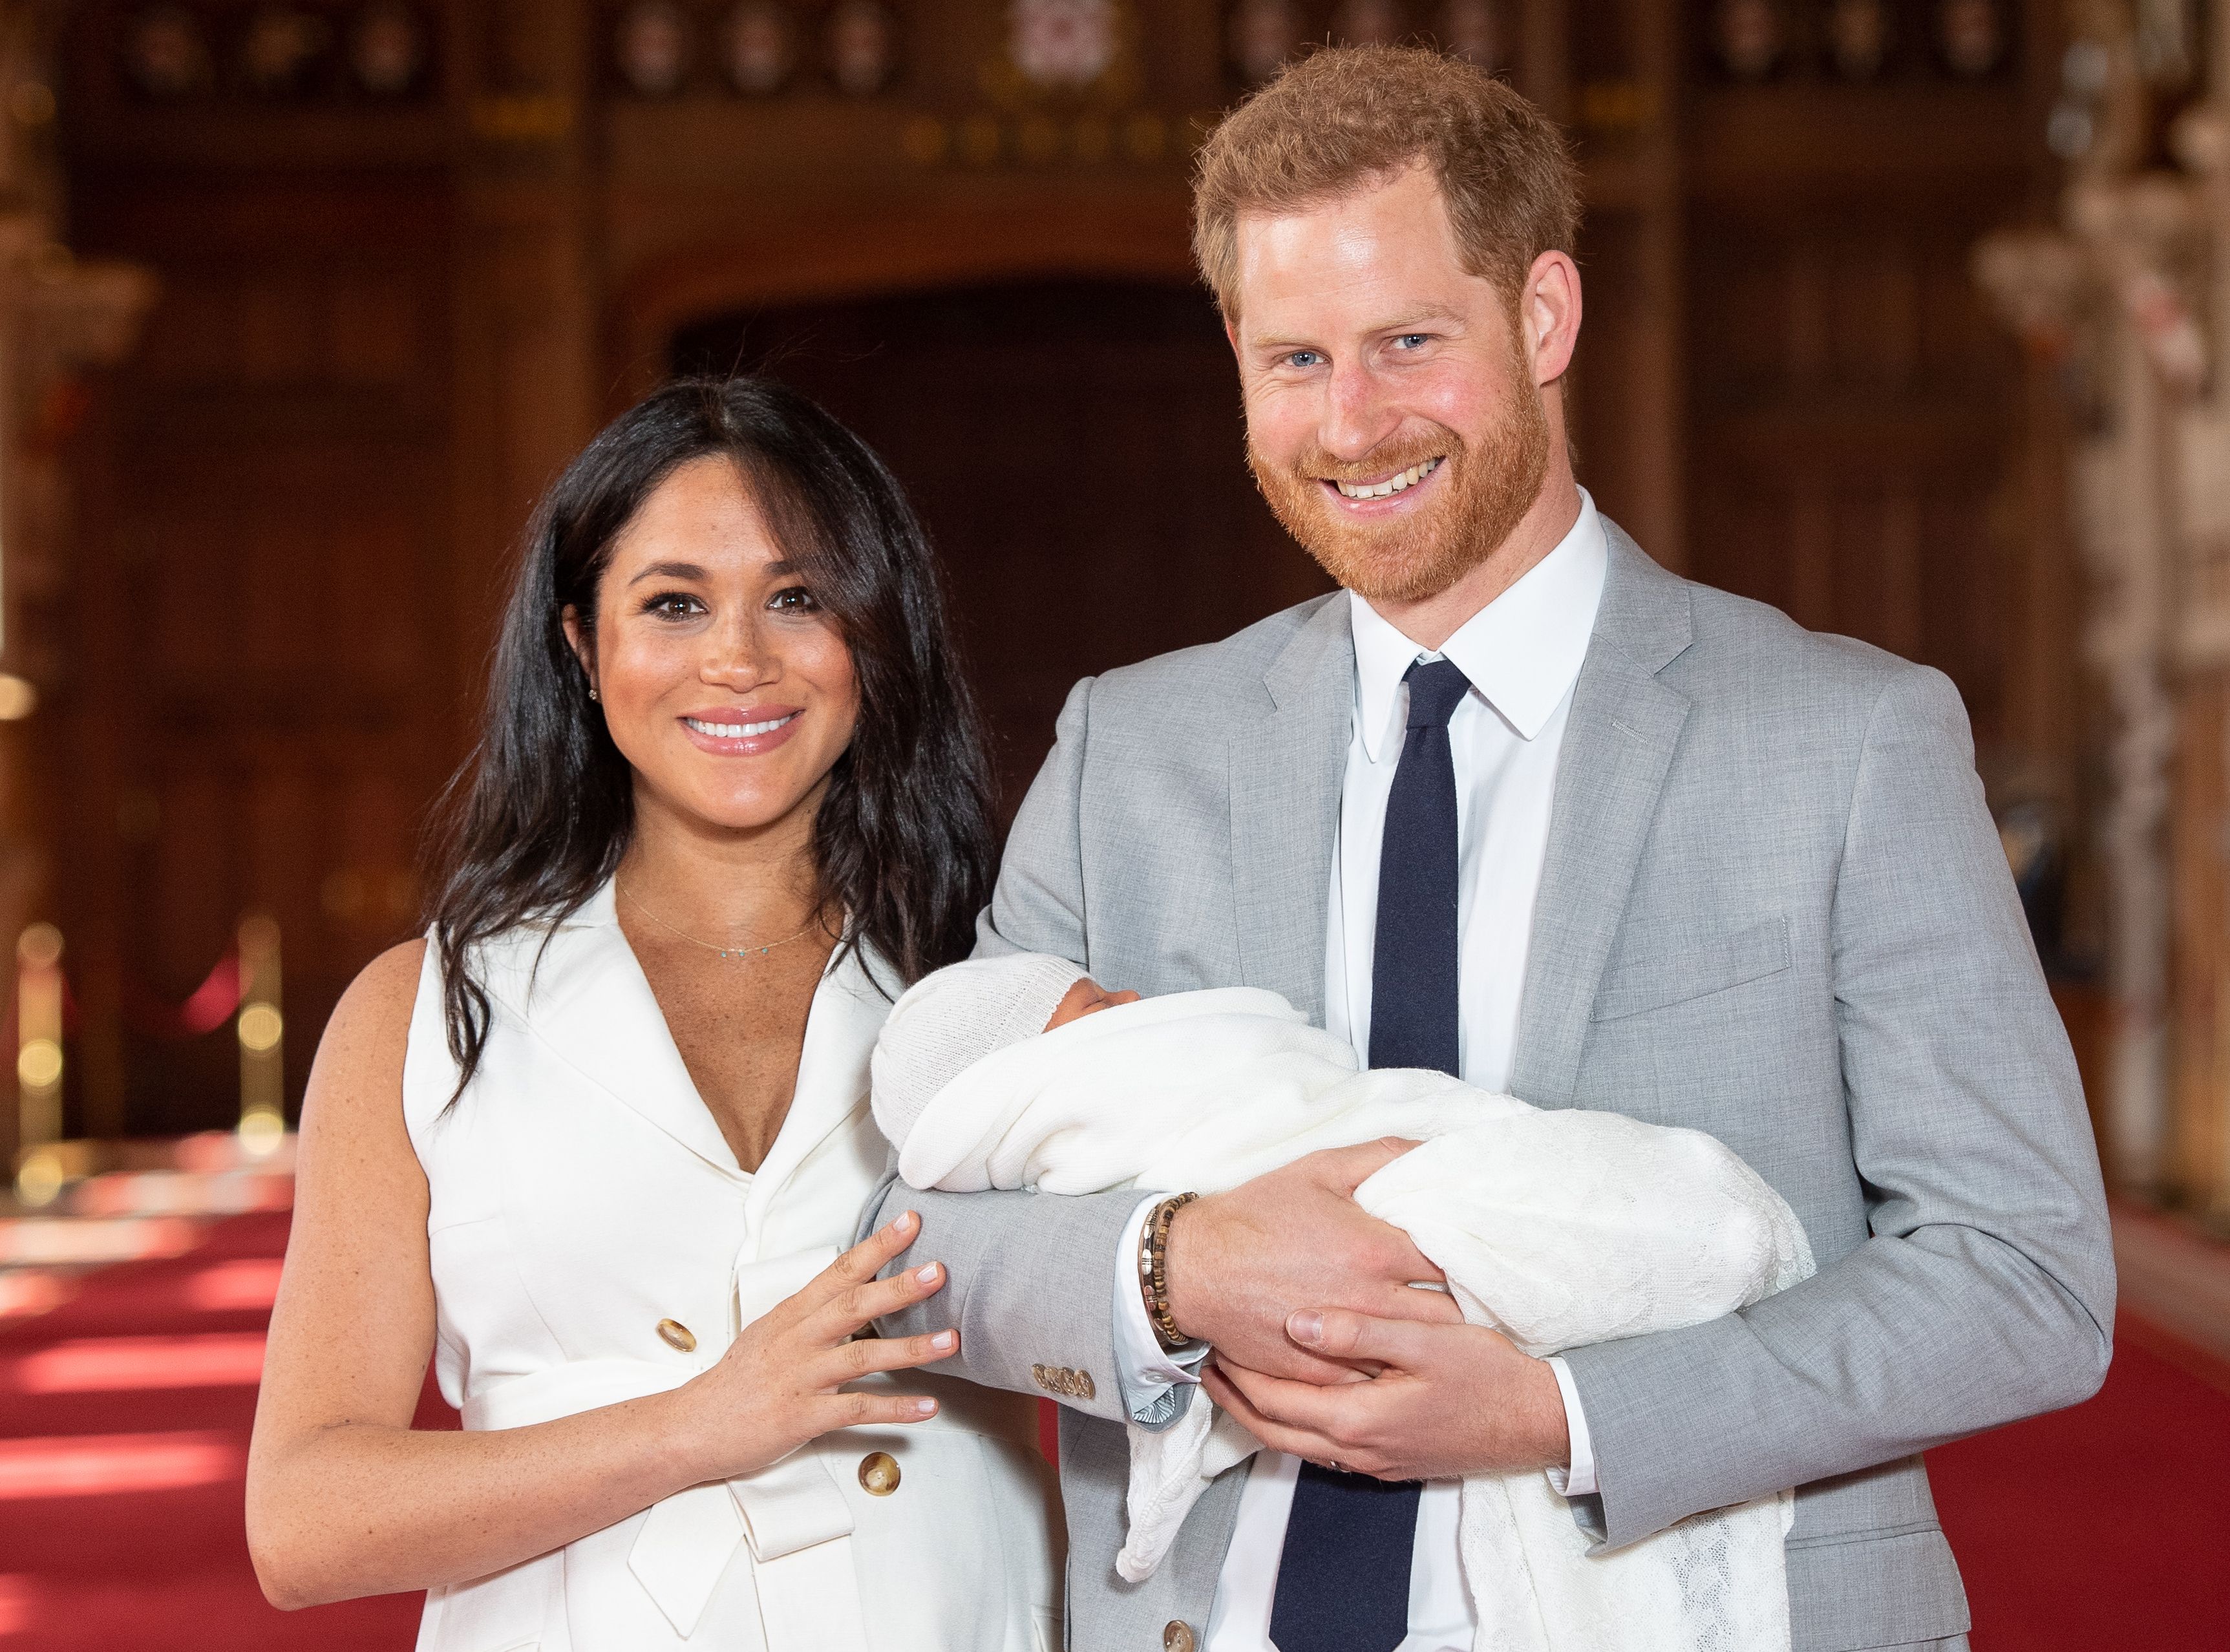 Prince Harry and Meghan Markle pose for a photo with their son, Archie Harrison Mountbatten-Windsor, days after he is born